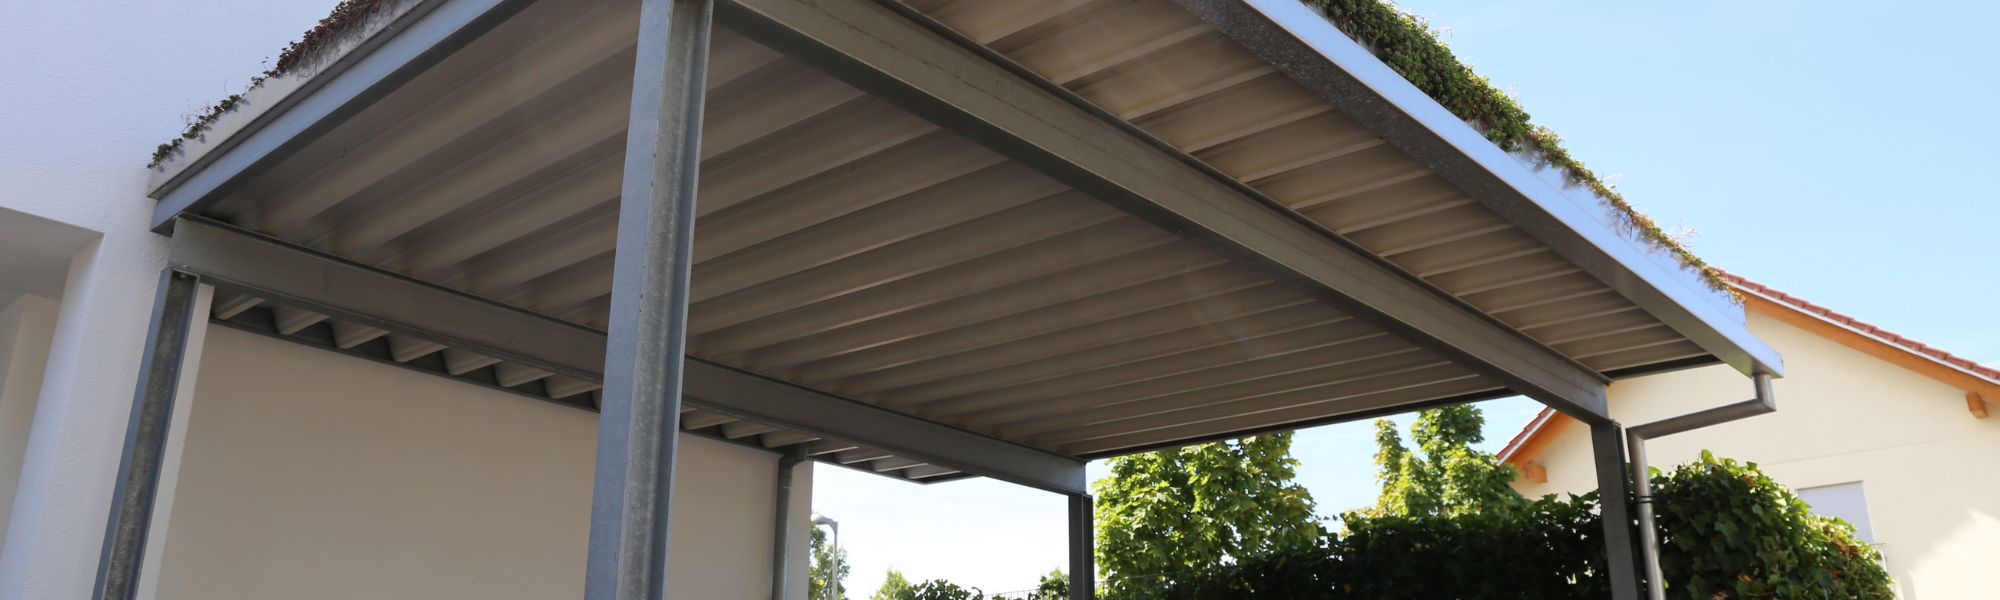 aluminum deck covers and canopy